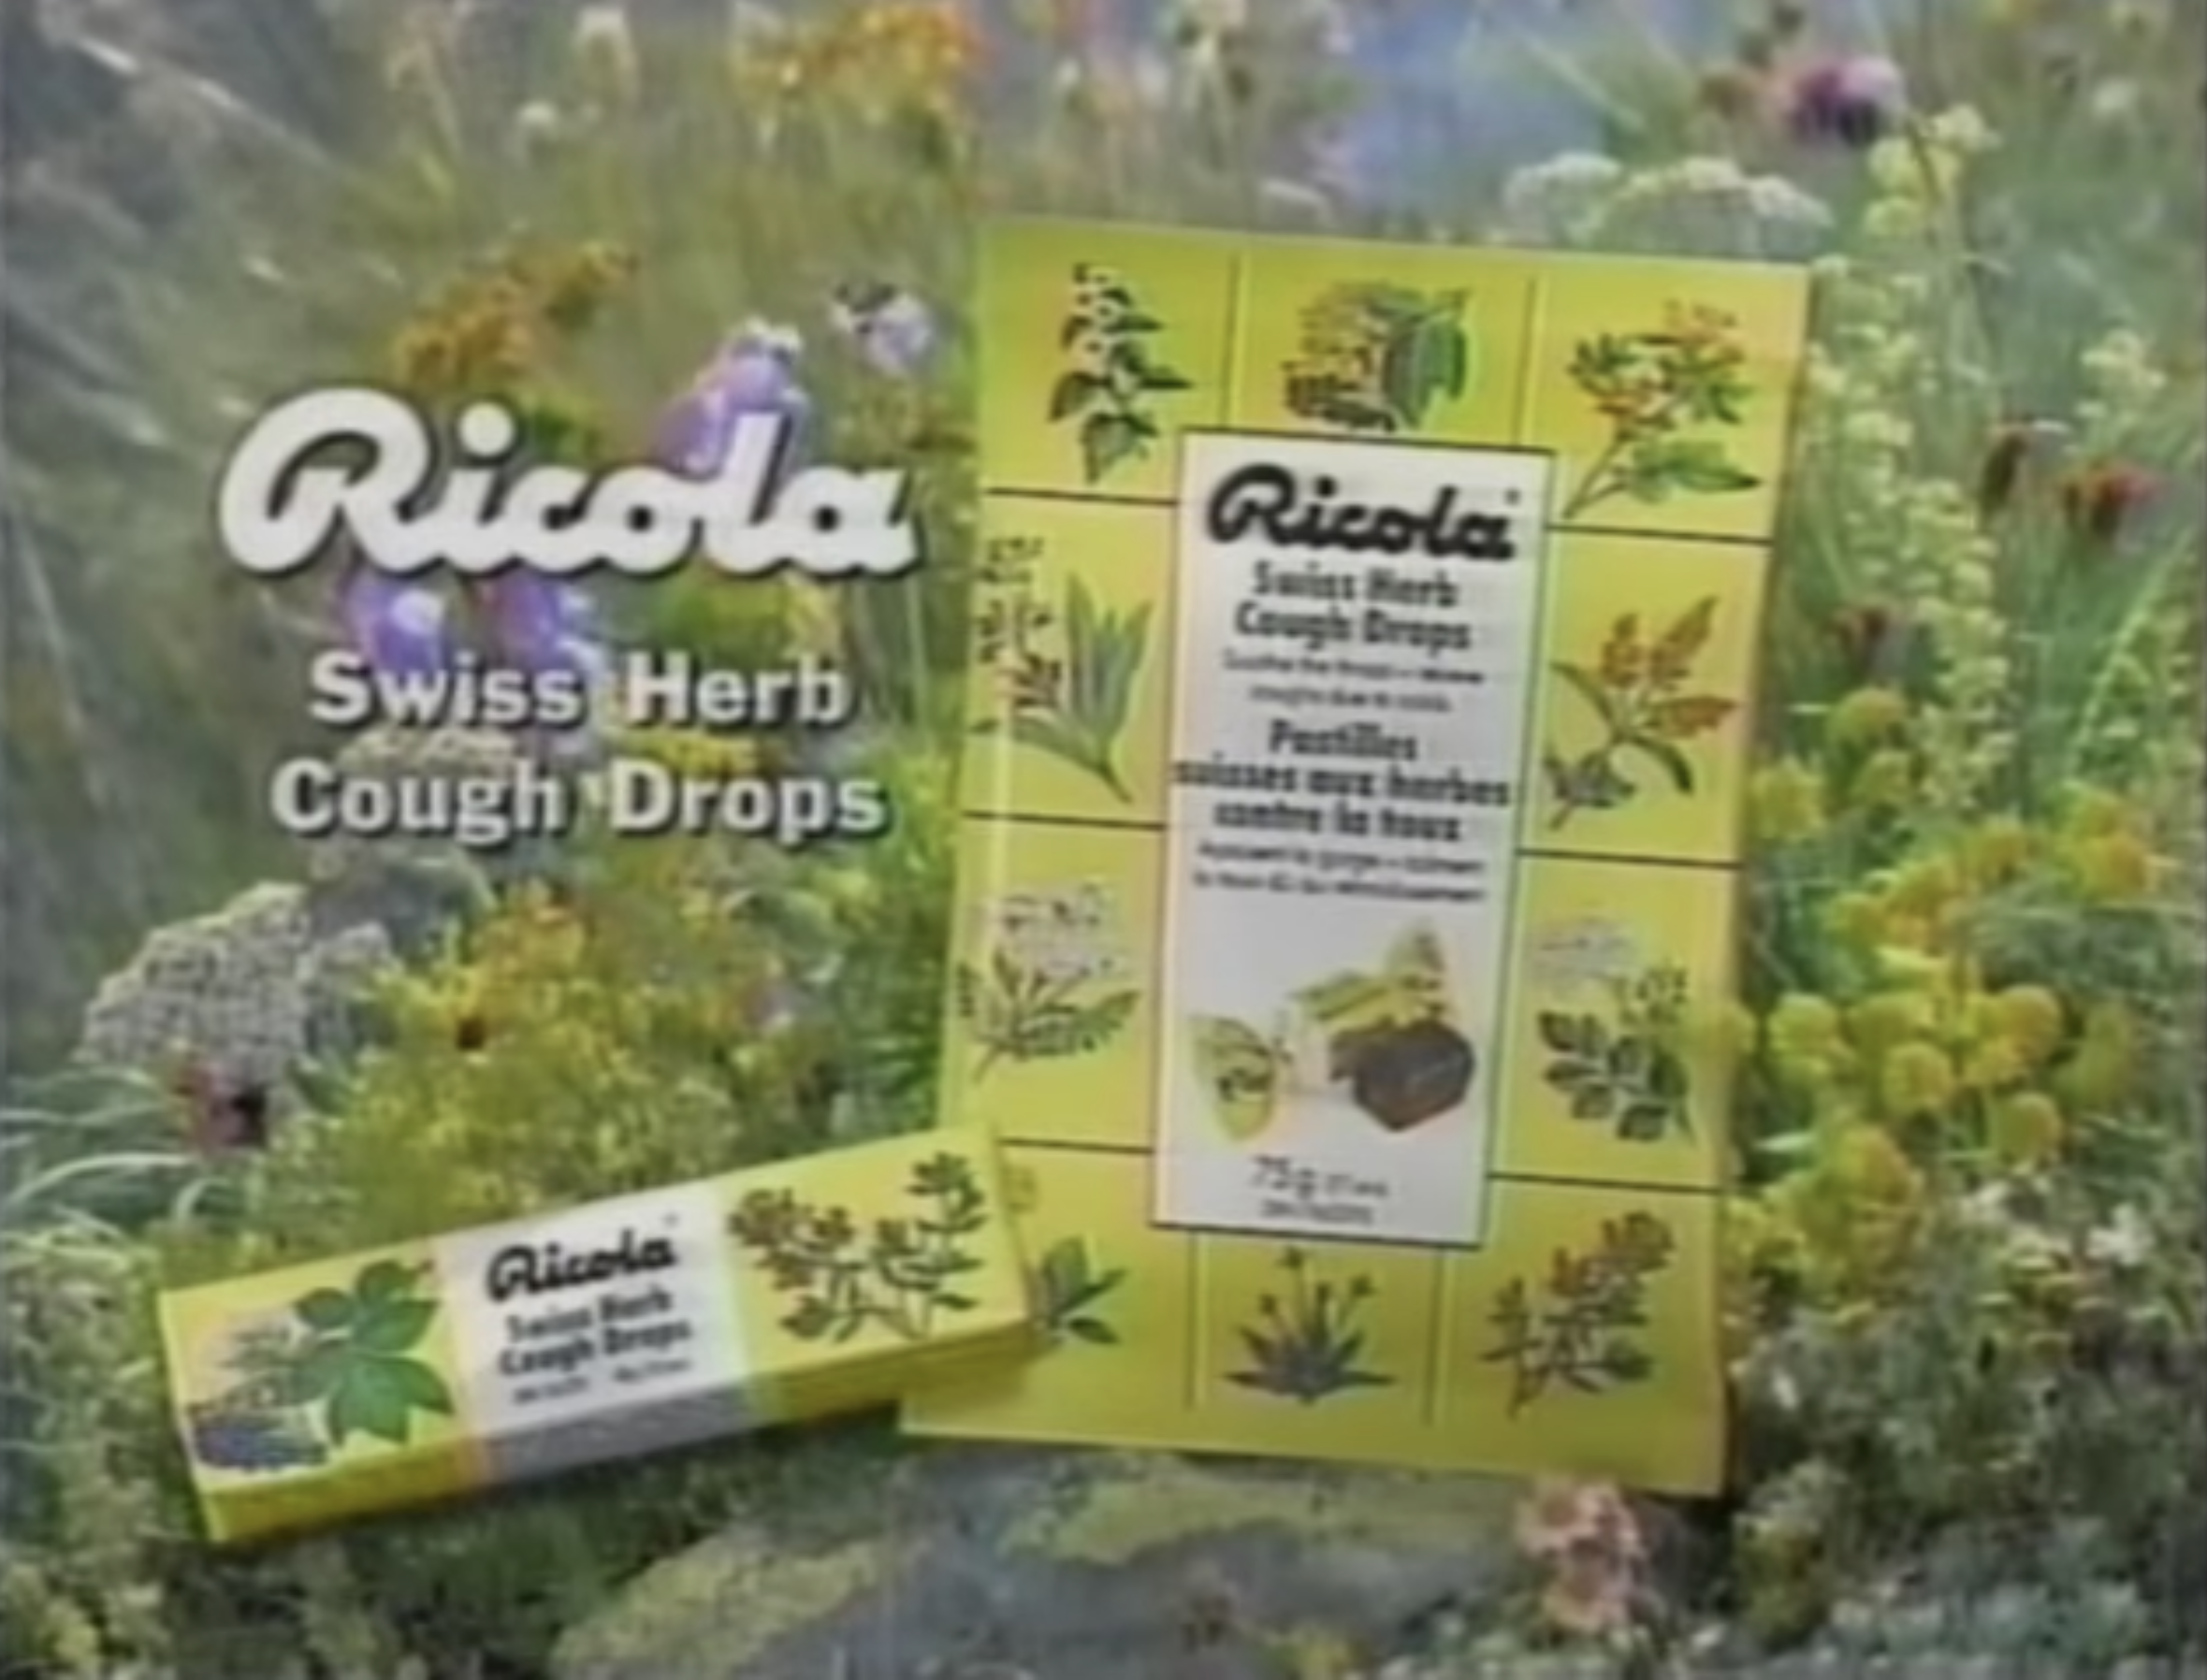 Screenshot from old Ricola commercial